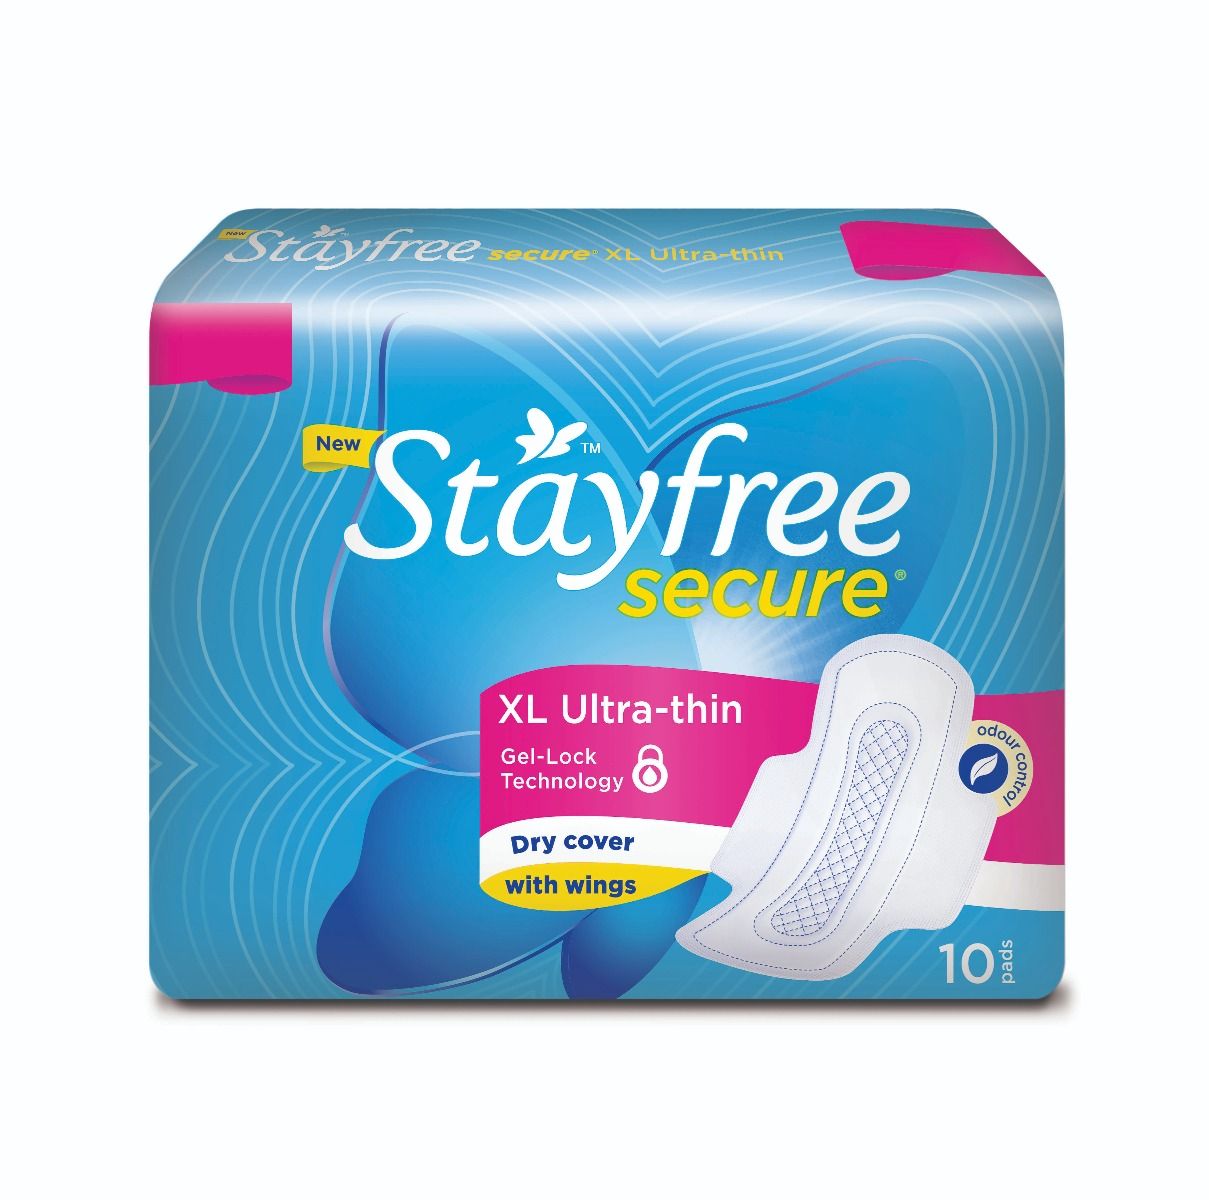 Stayfree Secure Ultra-Thin Pads with wings XL, 10 Count, Pack of 1 